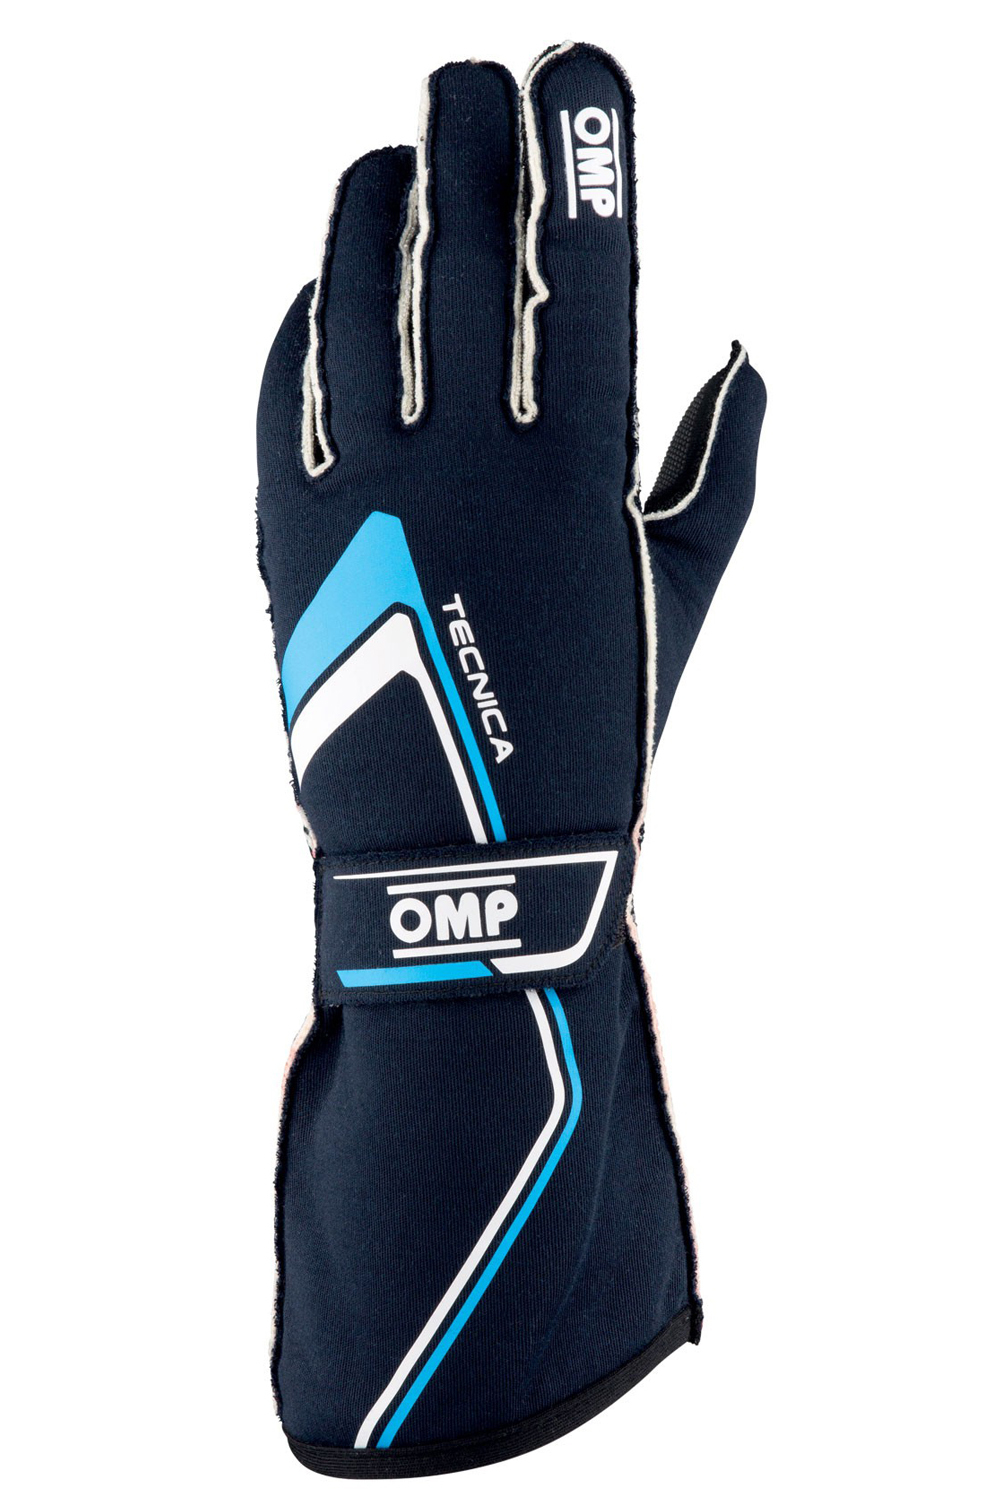 OMP Racing IB772BCXL Driving Gloves, Tecnica, FIA Approved, Double Layer, Fire Retardant Fabric, Blue / Cyan, X-Large, Pair